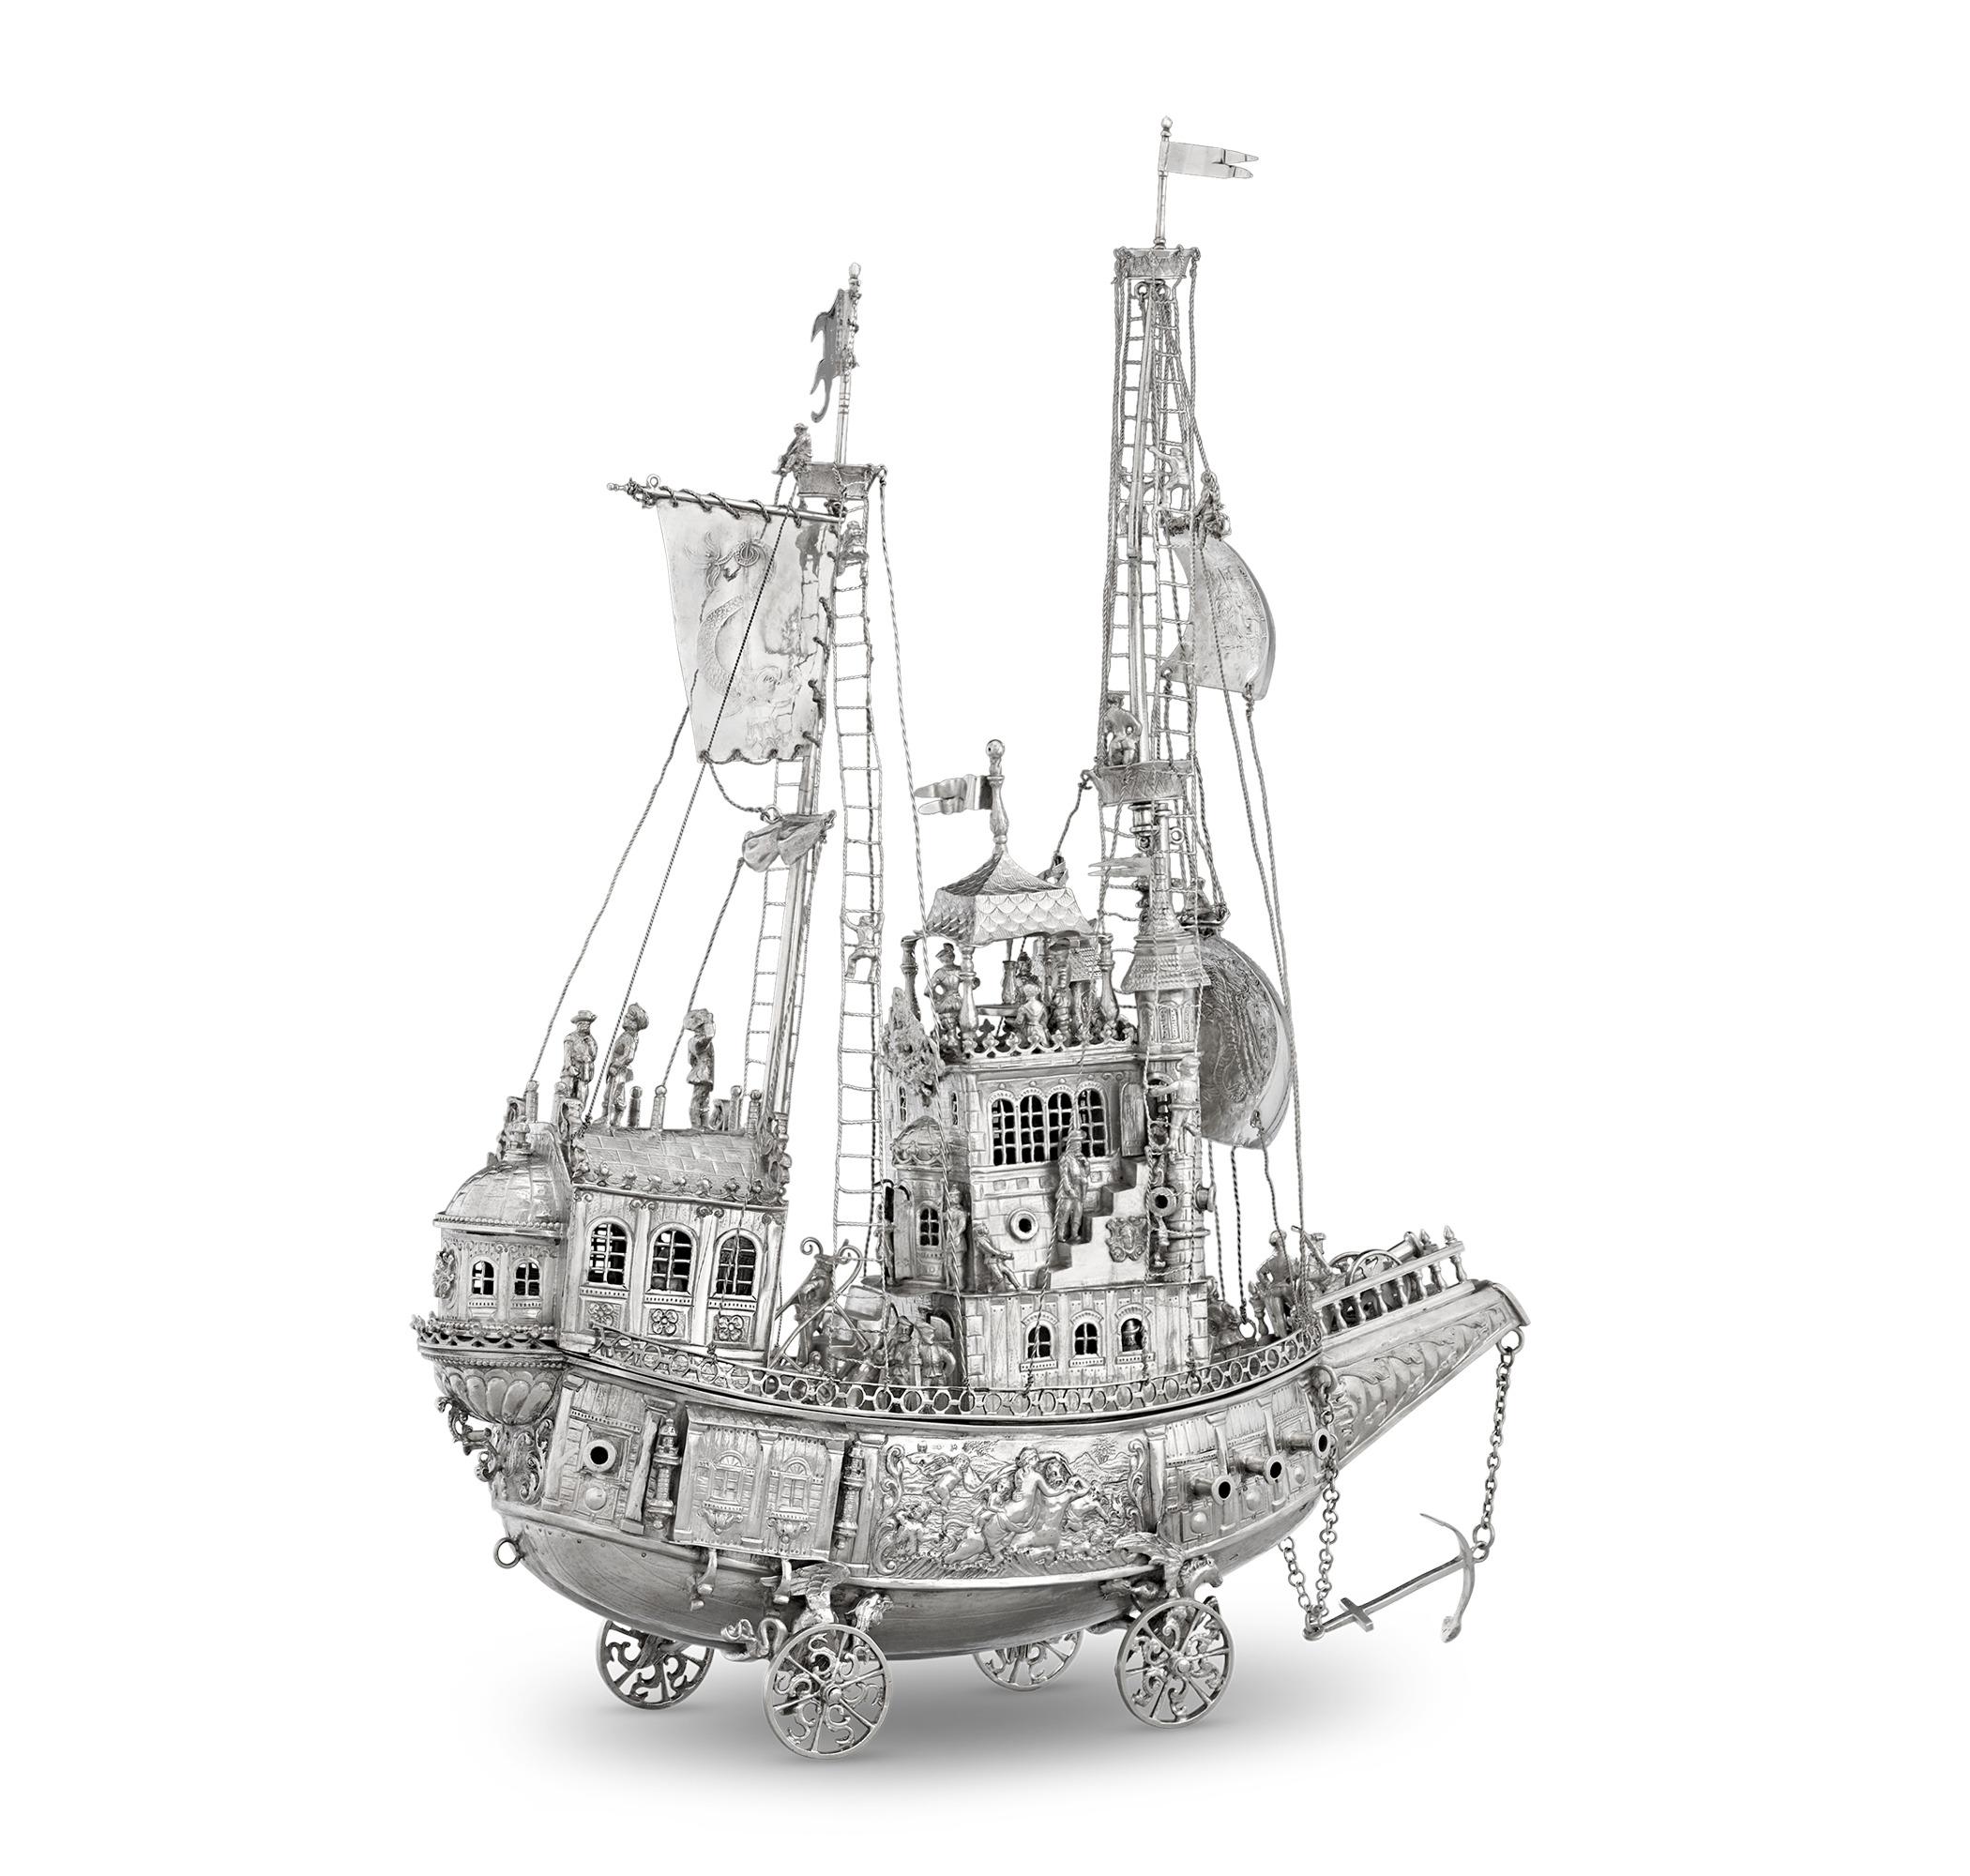 This colossal silver nef is a spectacular example of German silverwork from the town of Hanau. Used as a centerpiece for a table or sideboard, the ship was a visible representation of a patron's wealth. This particular model is quite rare in that it